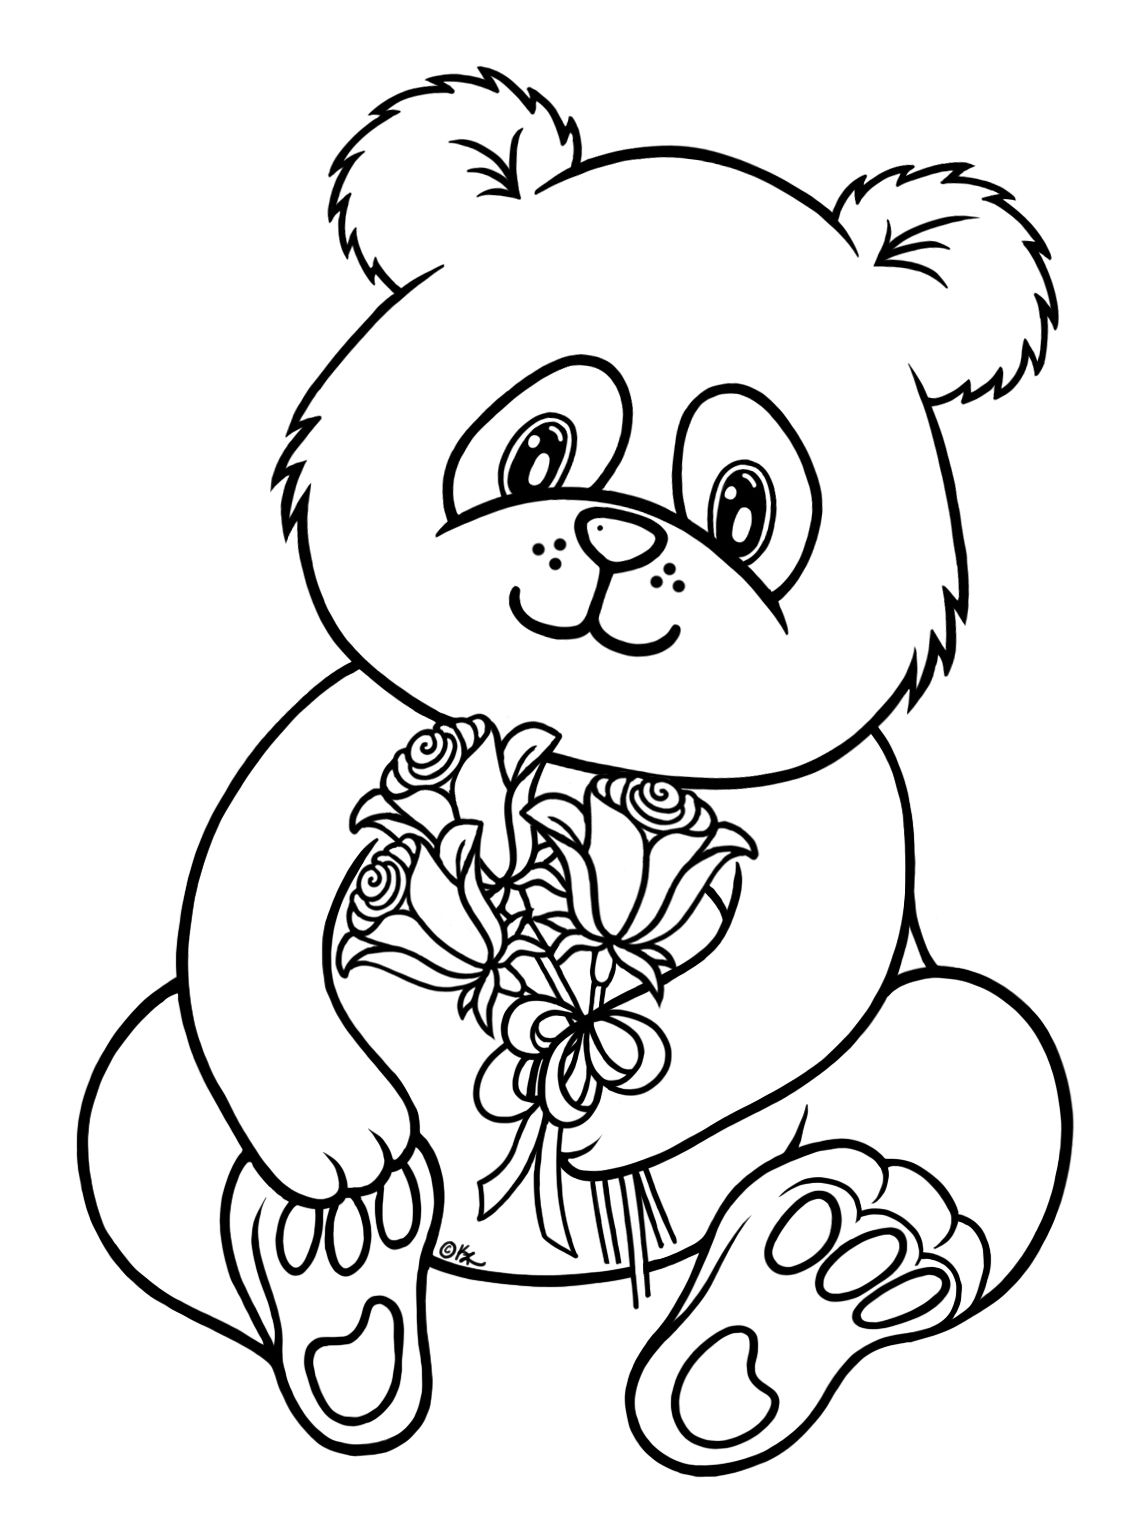 62-free-printable-panda-coloring-pages-in-vector-format-easy-to-print